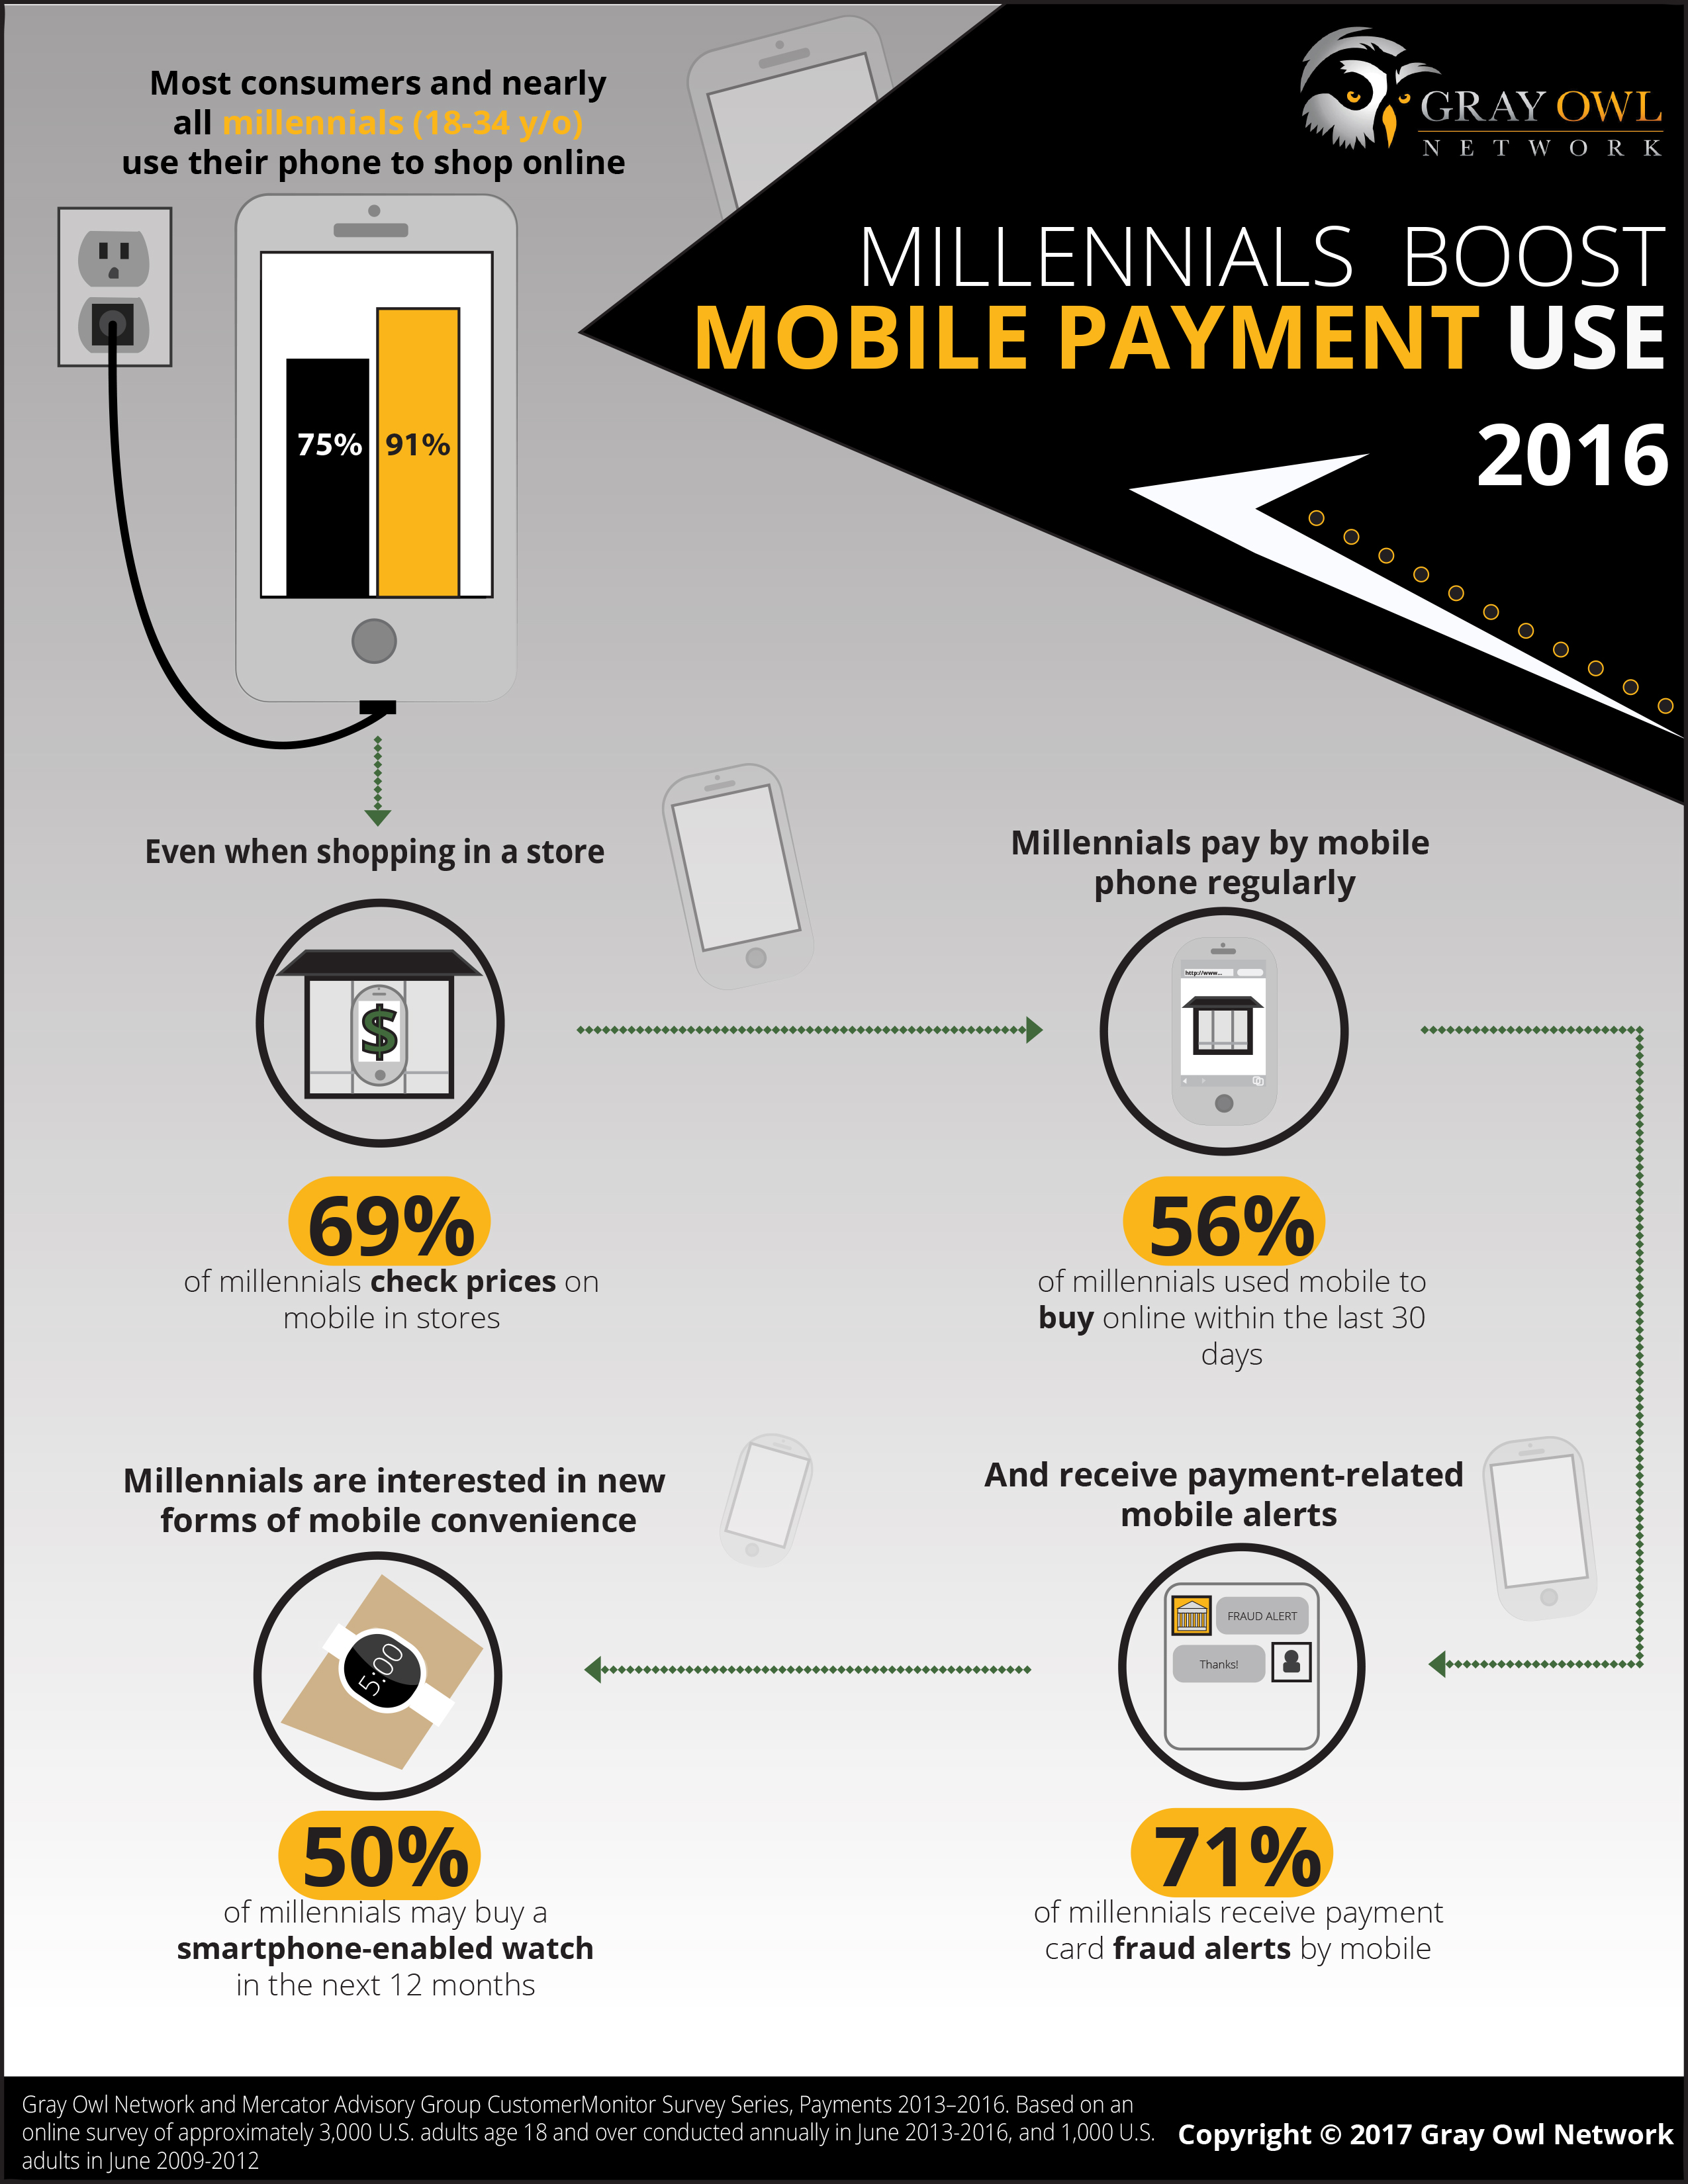 https://letstalkpayments.com/millennials-boost-mobile-payment-use-2016-infographic/